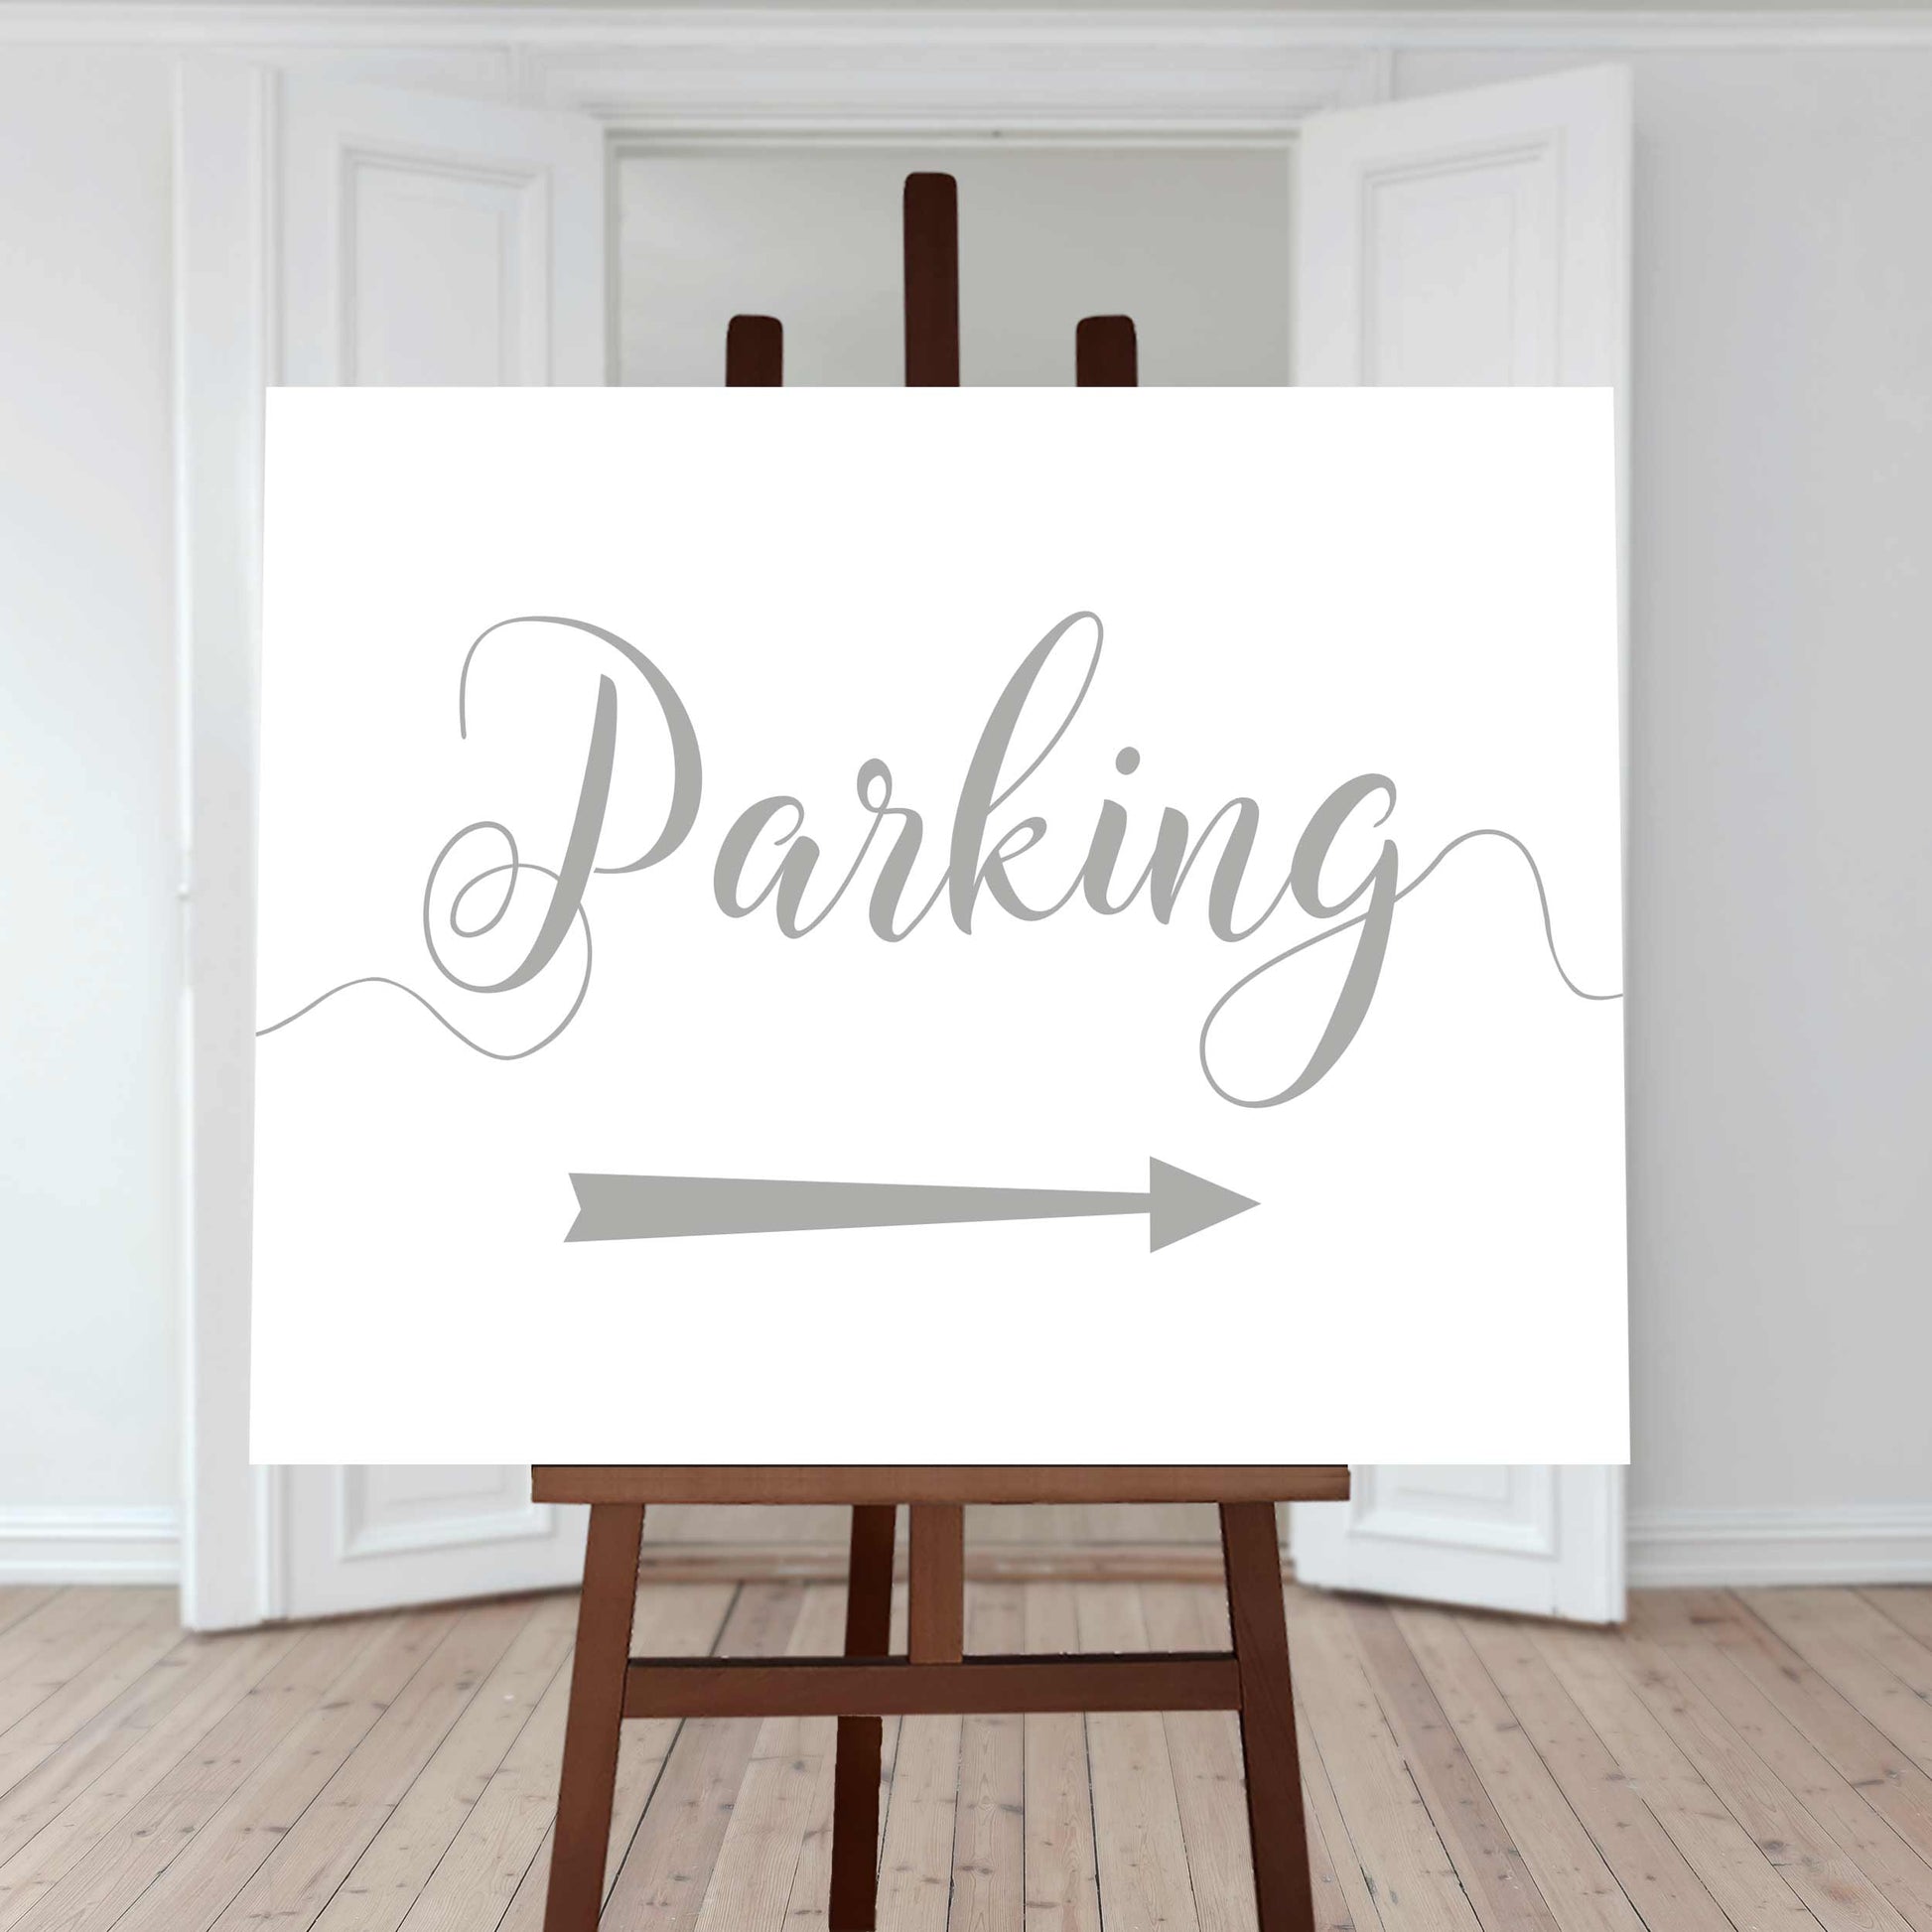 silver wedding car park directions sign with an arrow pointing right